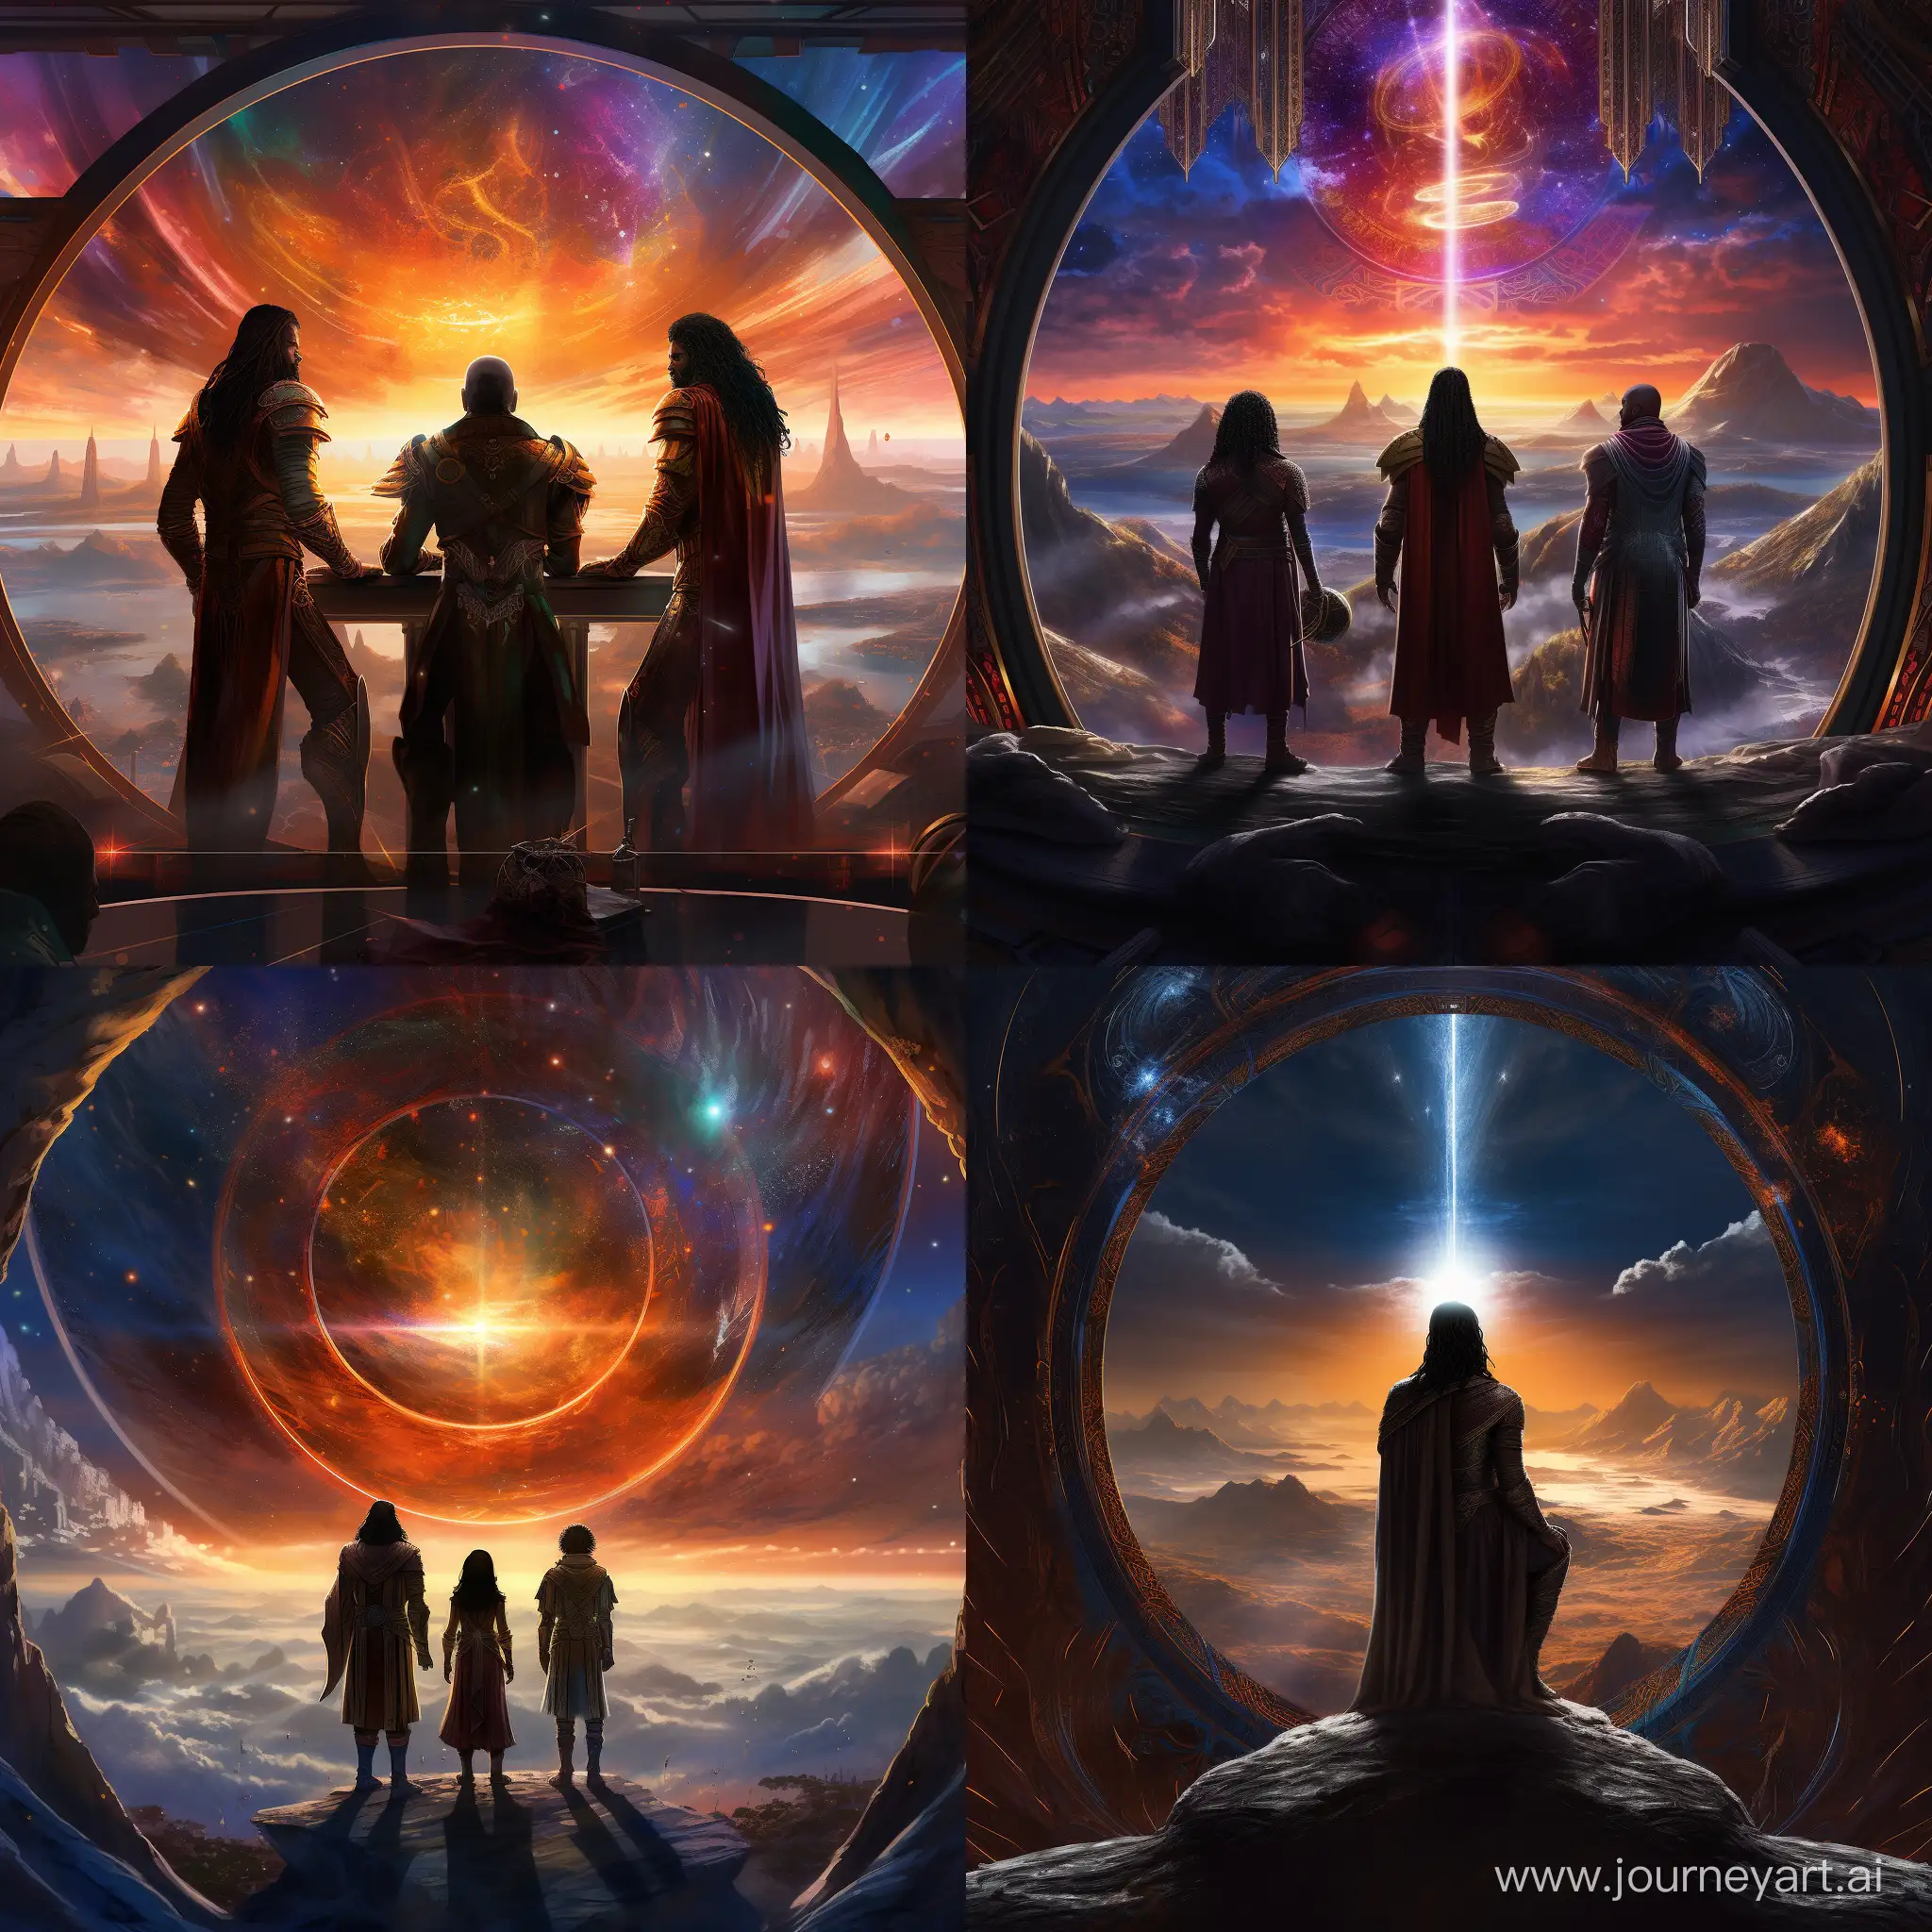 heimdall, bifrost, asgaard, looking out into the universe